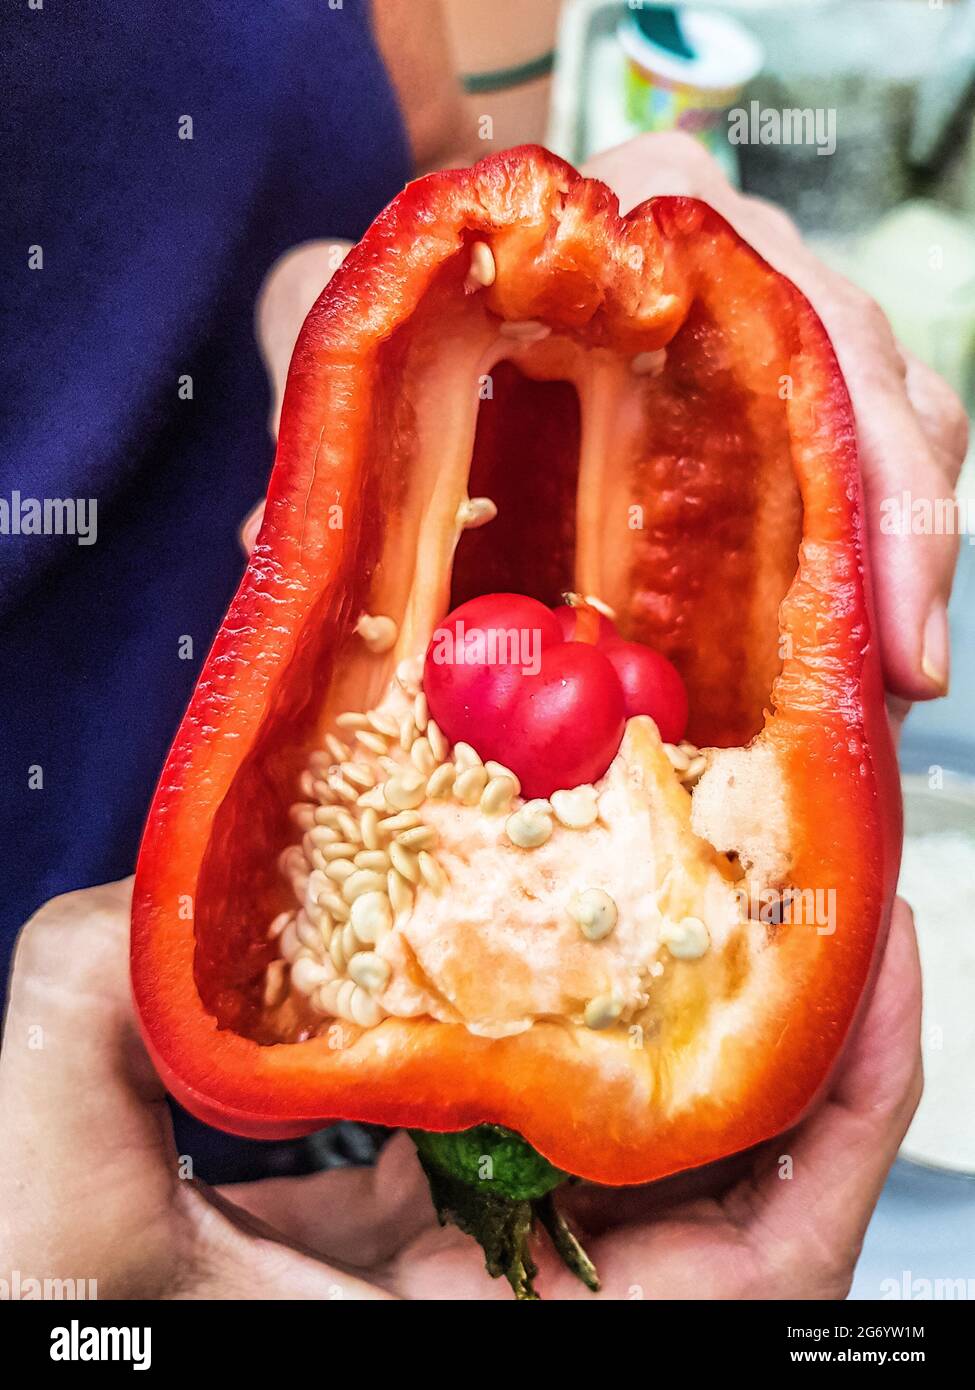 Red paprika with seeds and small baby pepper inside Stock Photo - Alamy